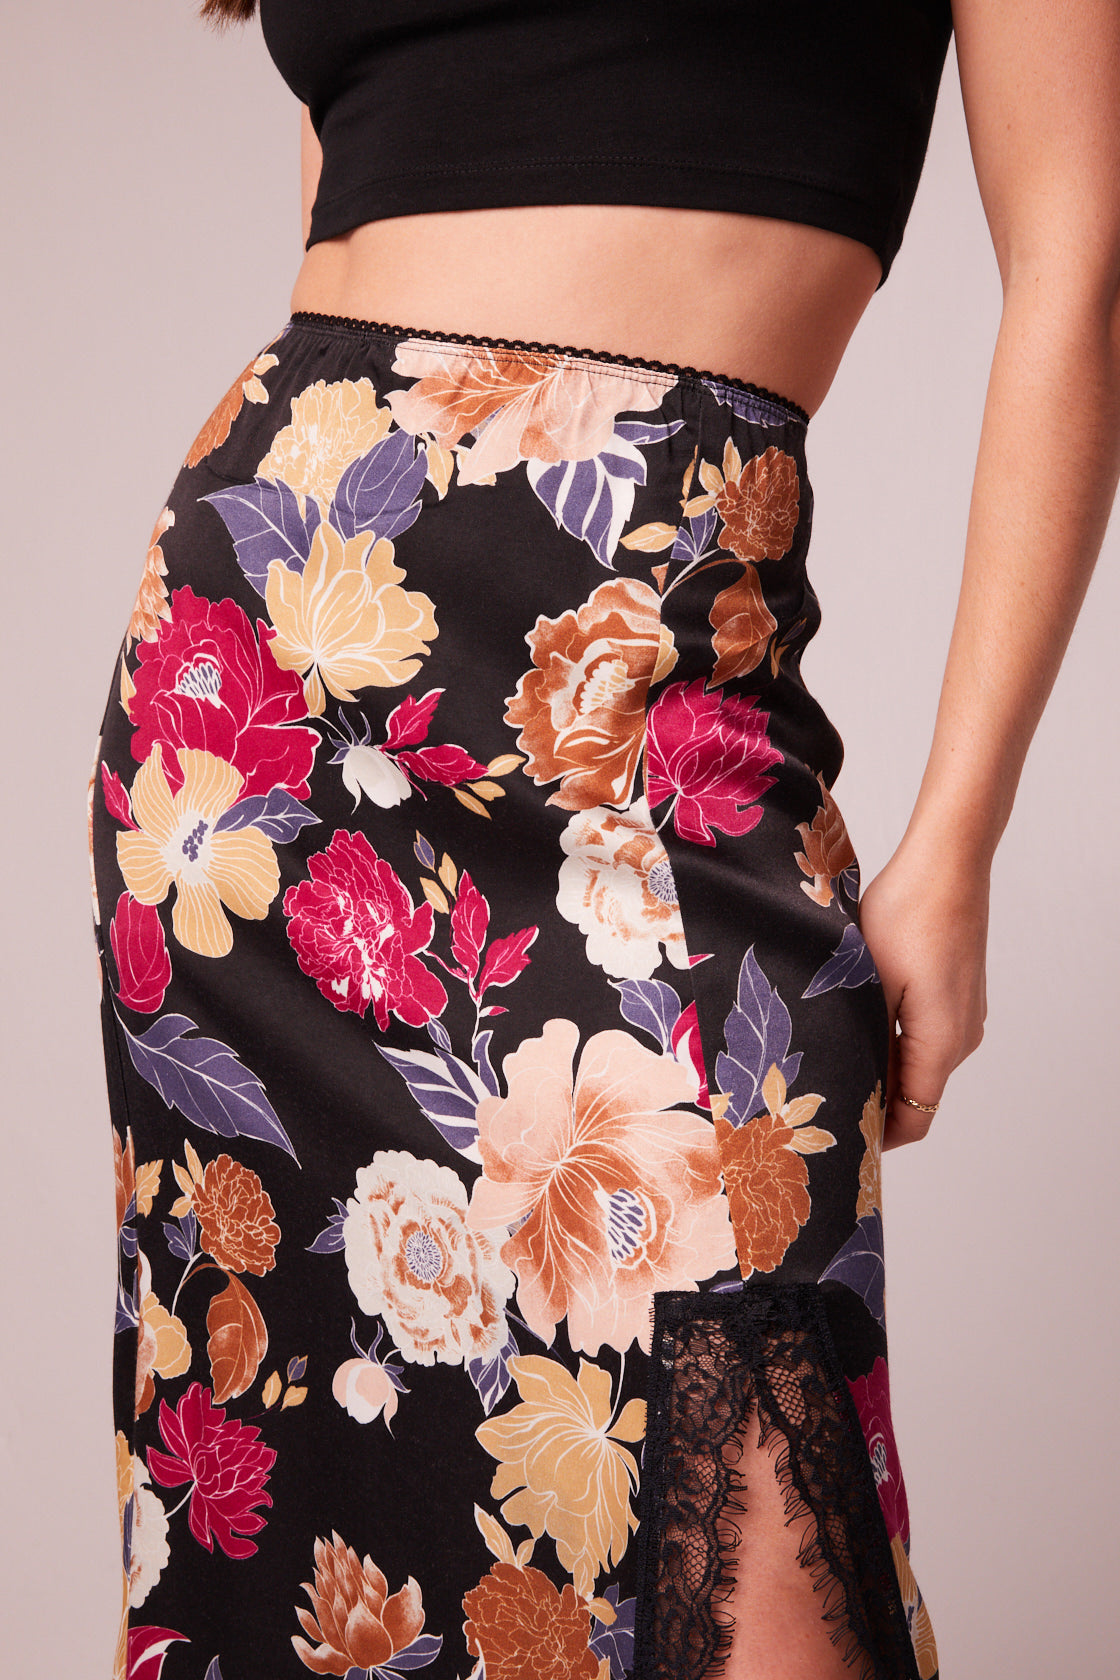 Lilou Black Floral Lace - Slip free the Skirt band of Midi